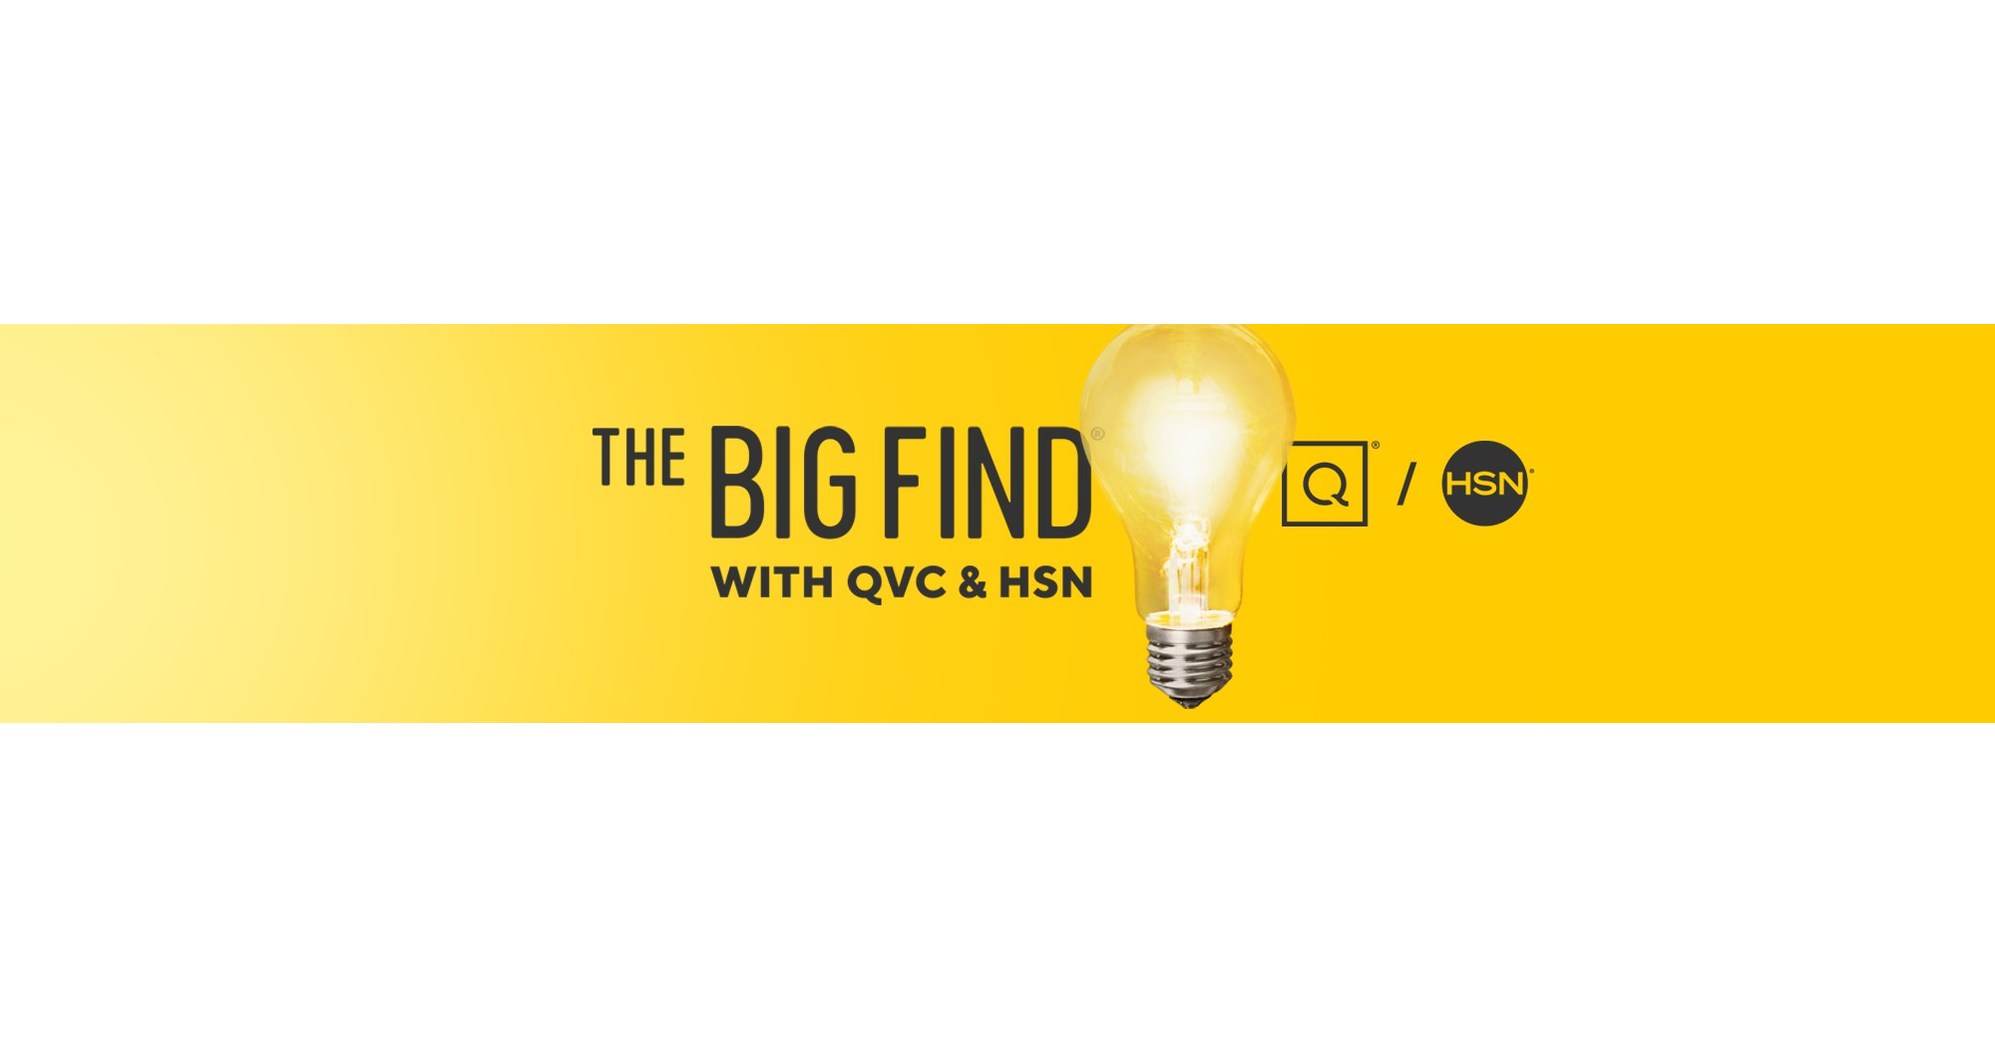 Qvc And Hsn To Debut Over 60 New Women And Minority Owned Brands Through The Big Find International Product Search